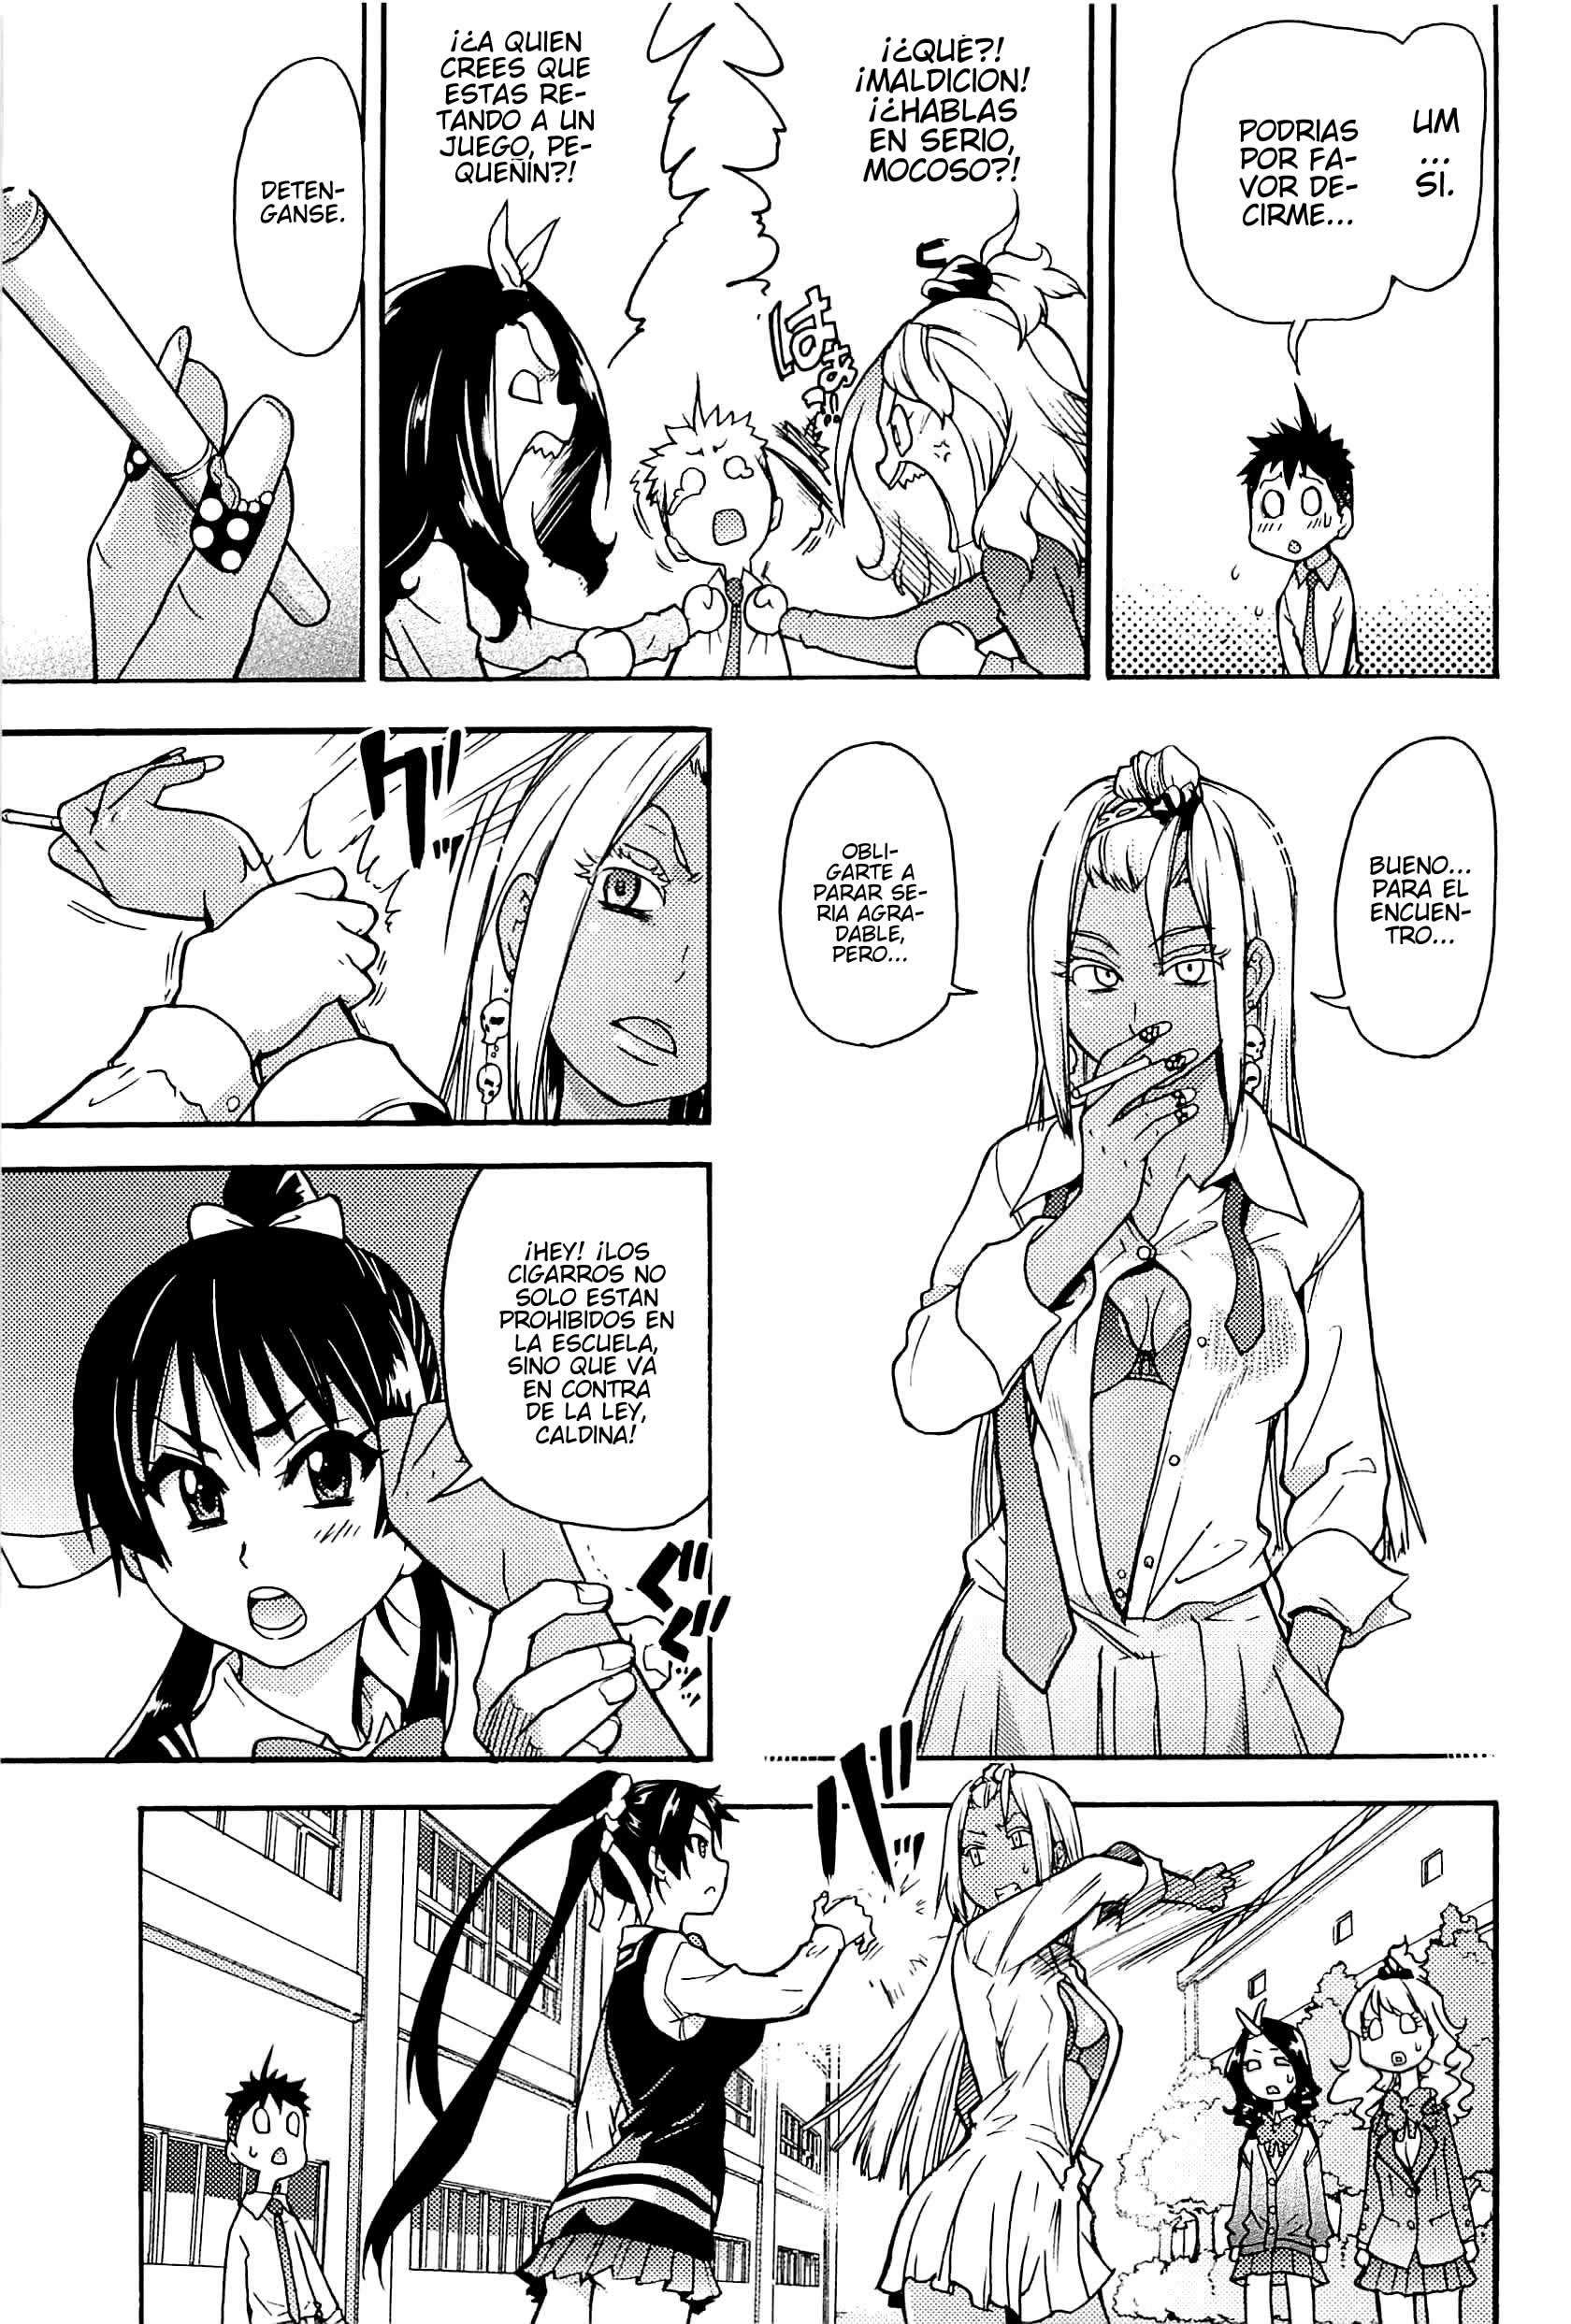 Peace Hame! Jou Completo Chapter-6 - 2